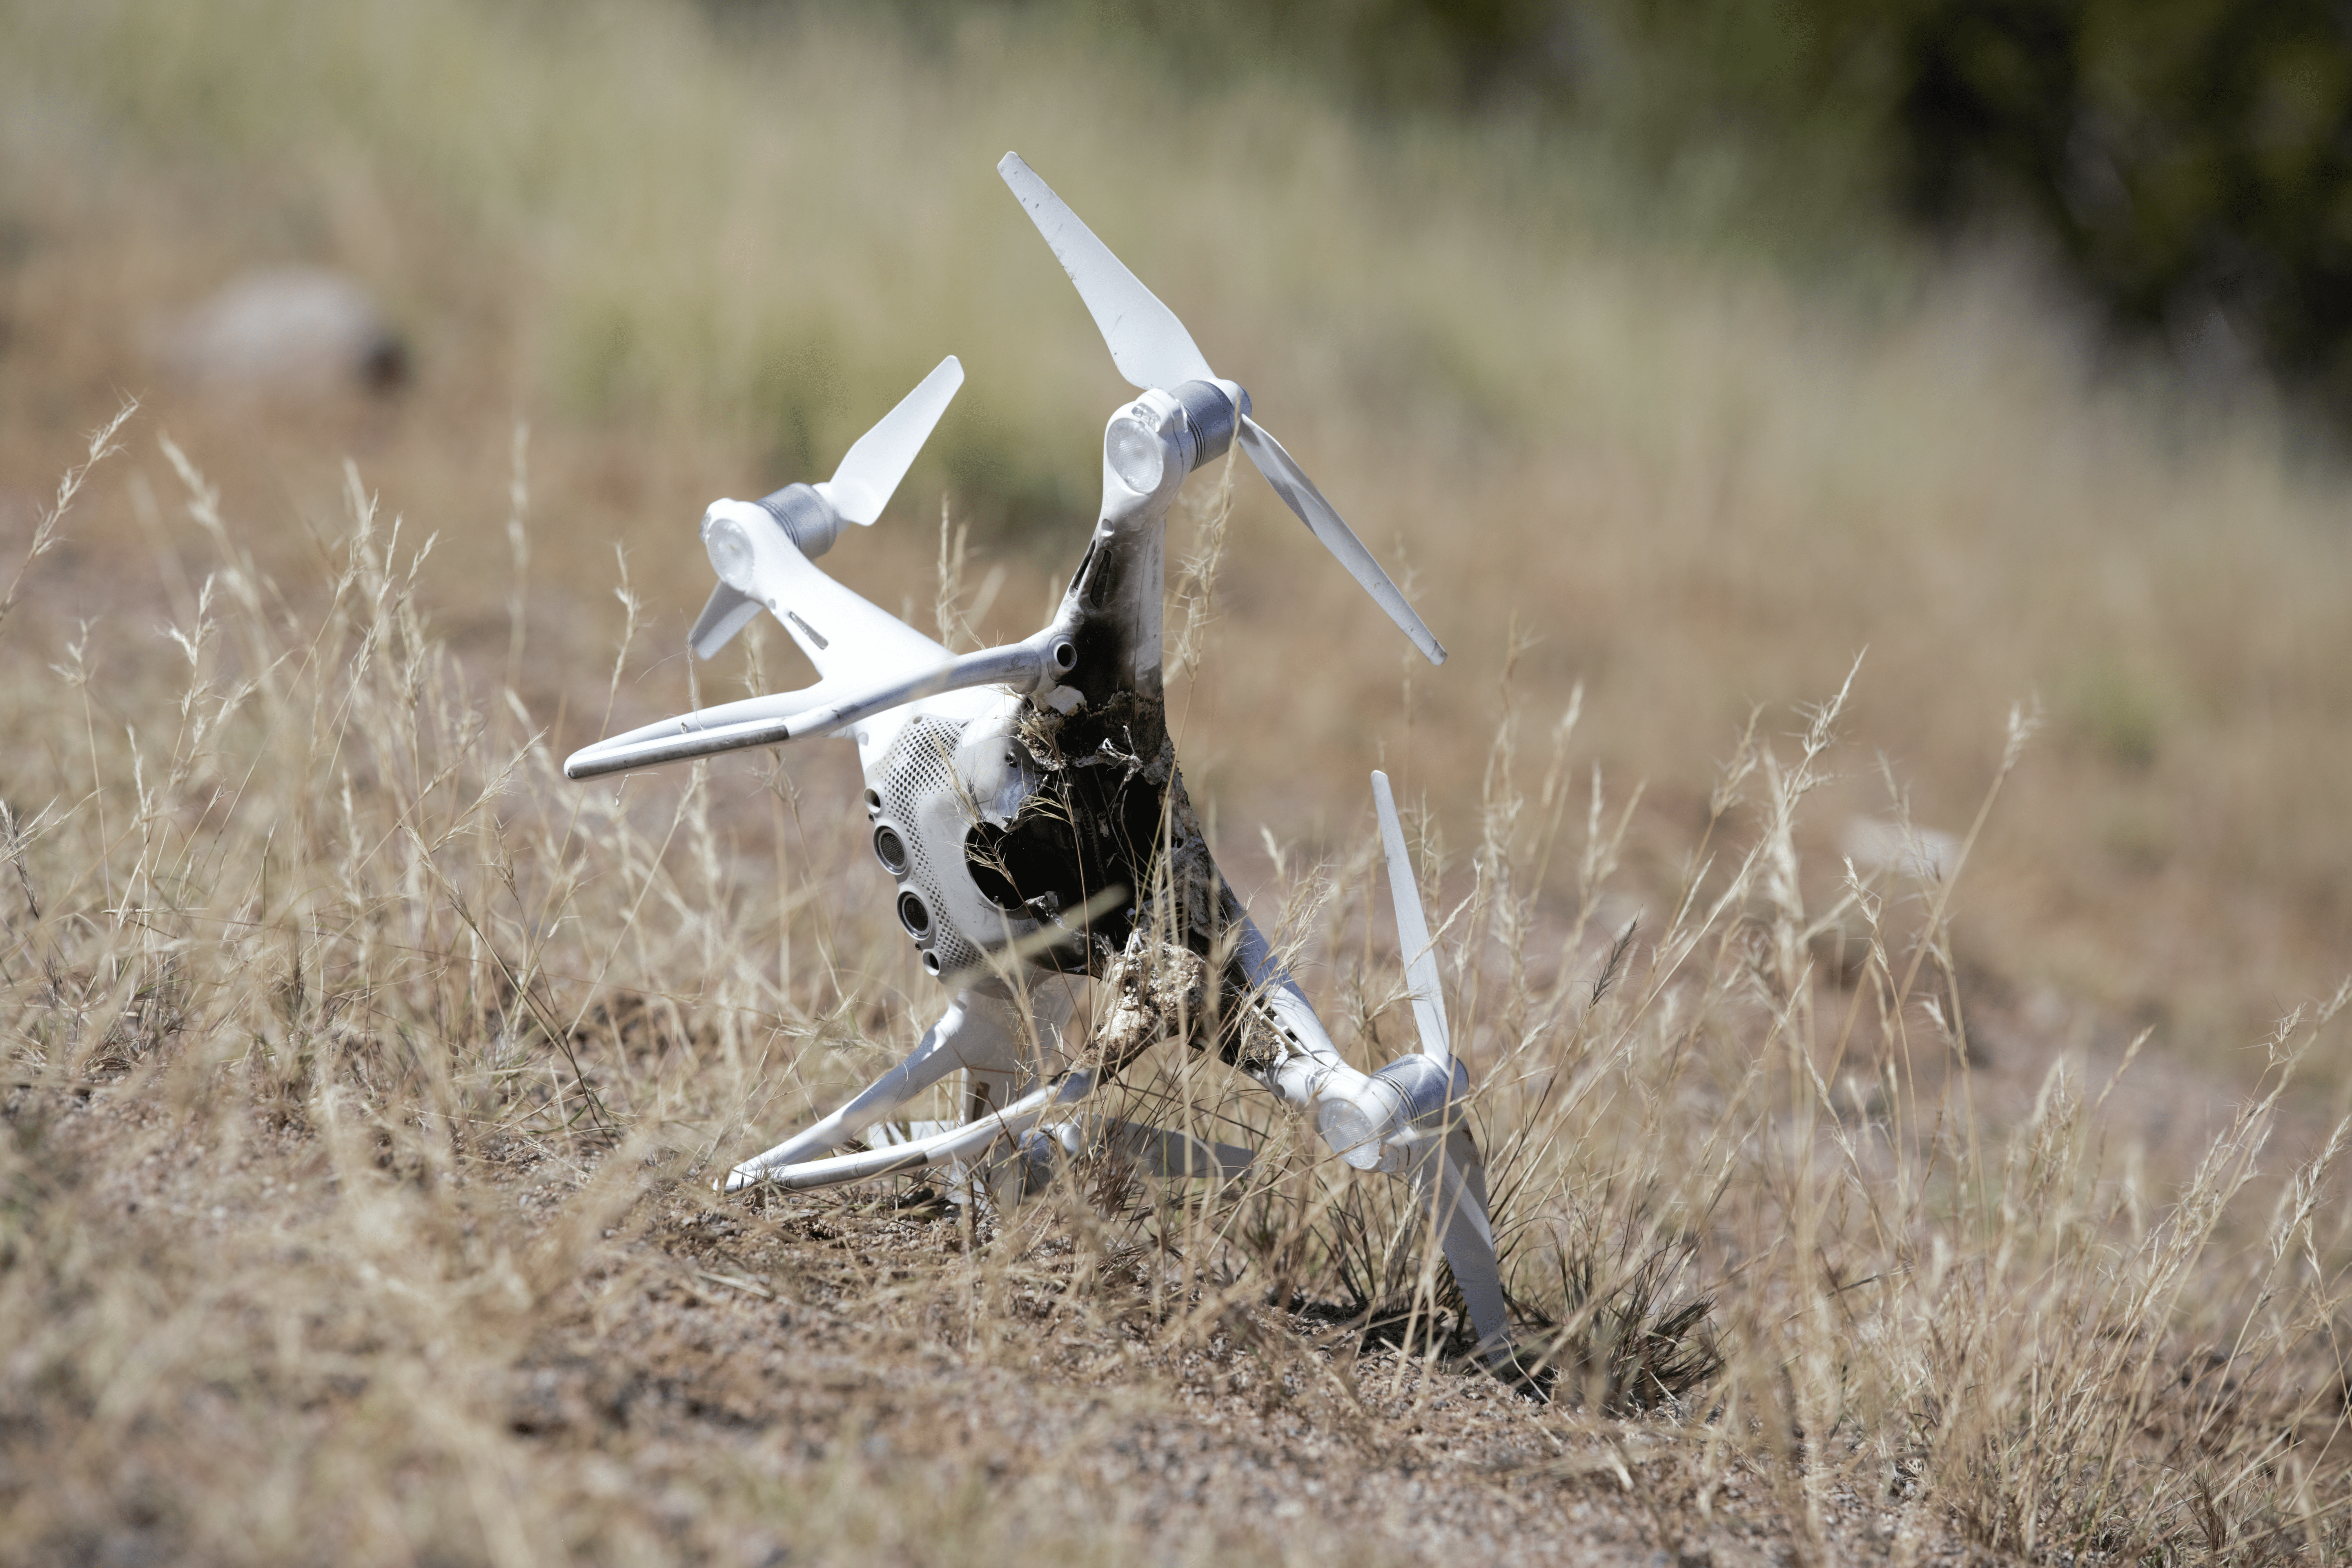 A downed drone lying in grass